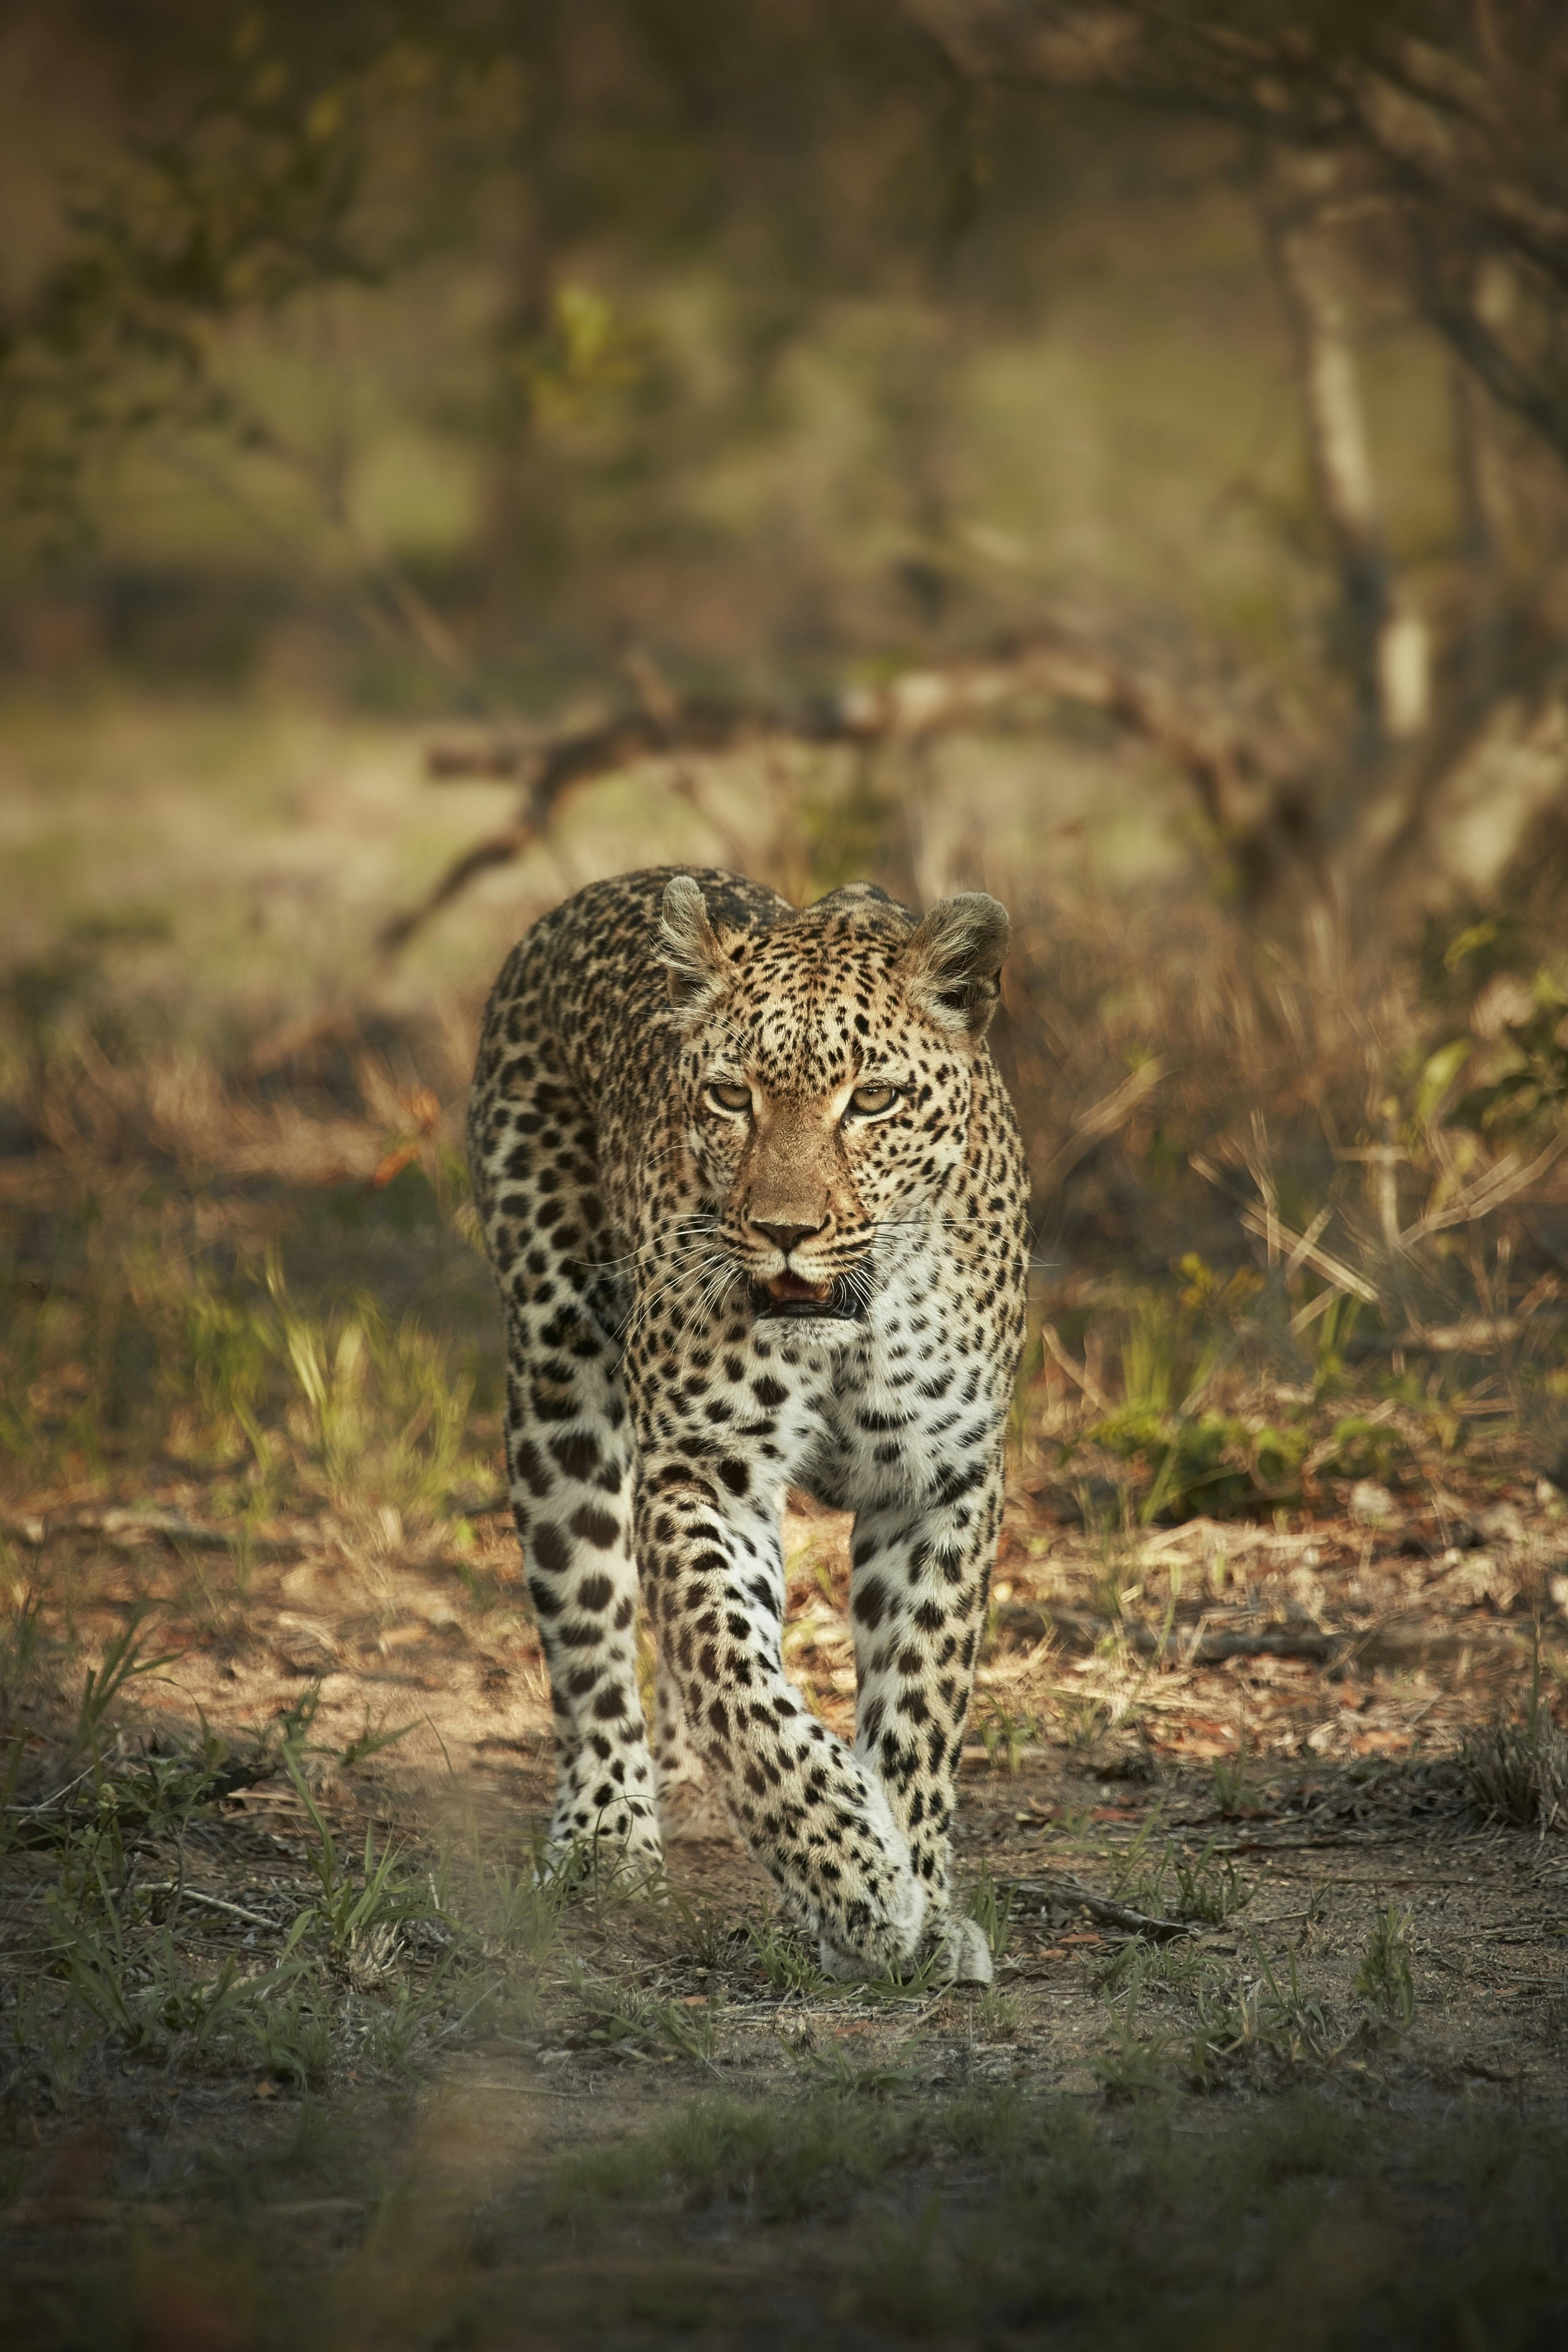 A lone leopard walks towards the camera in the wild; the grass is dry and there are gnarled trees in the background.  